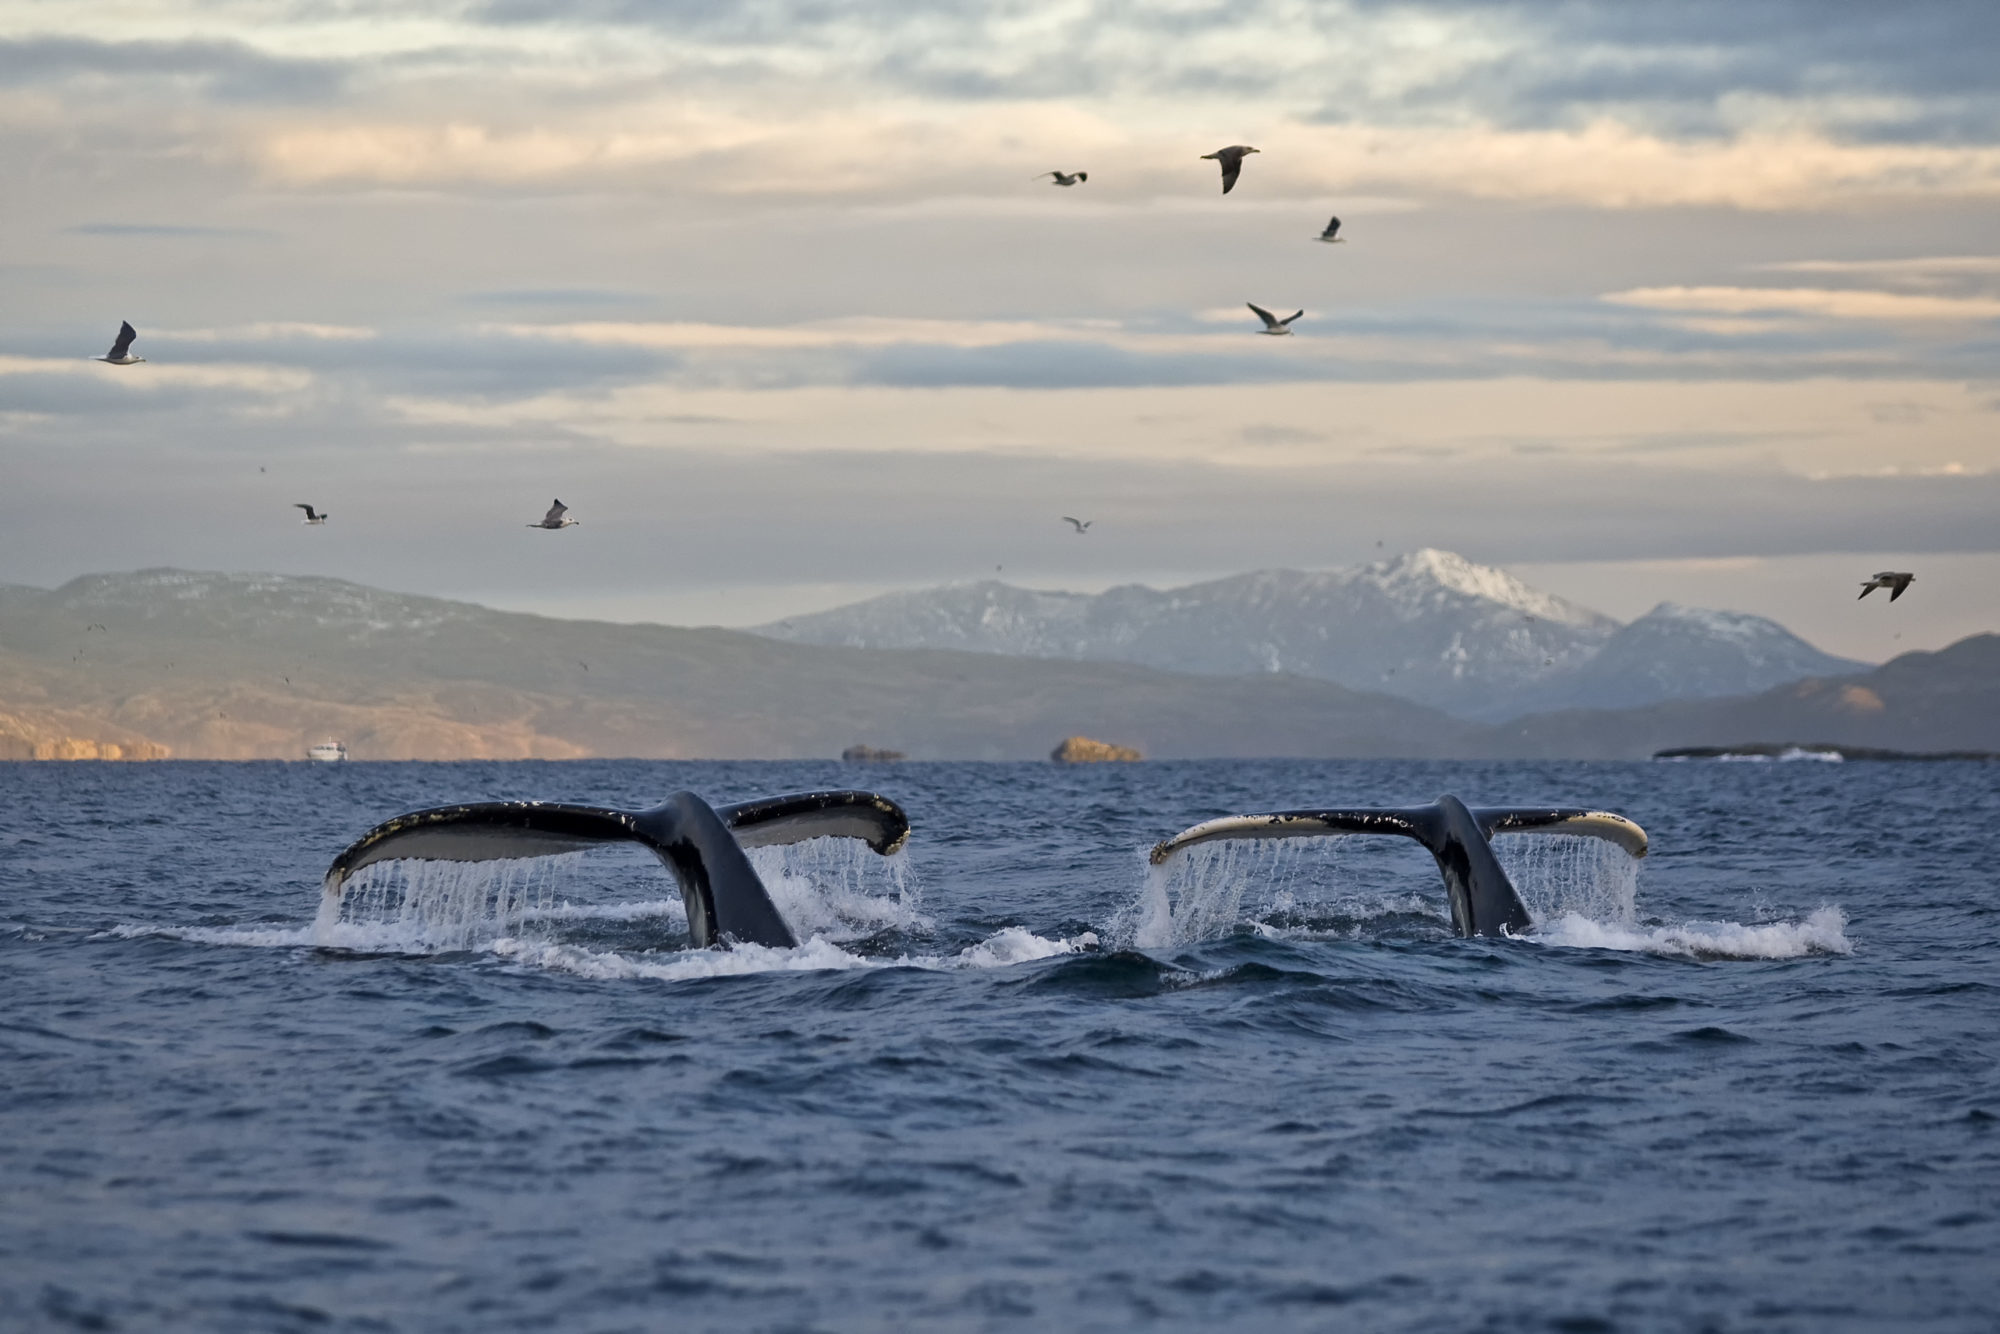 humpback whales off Norway